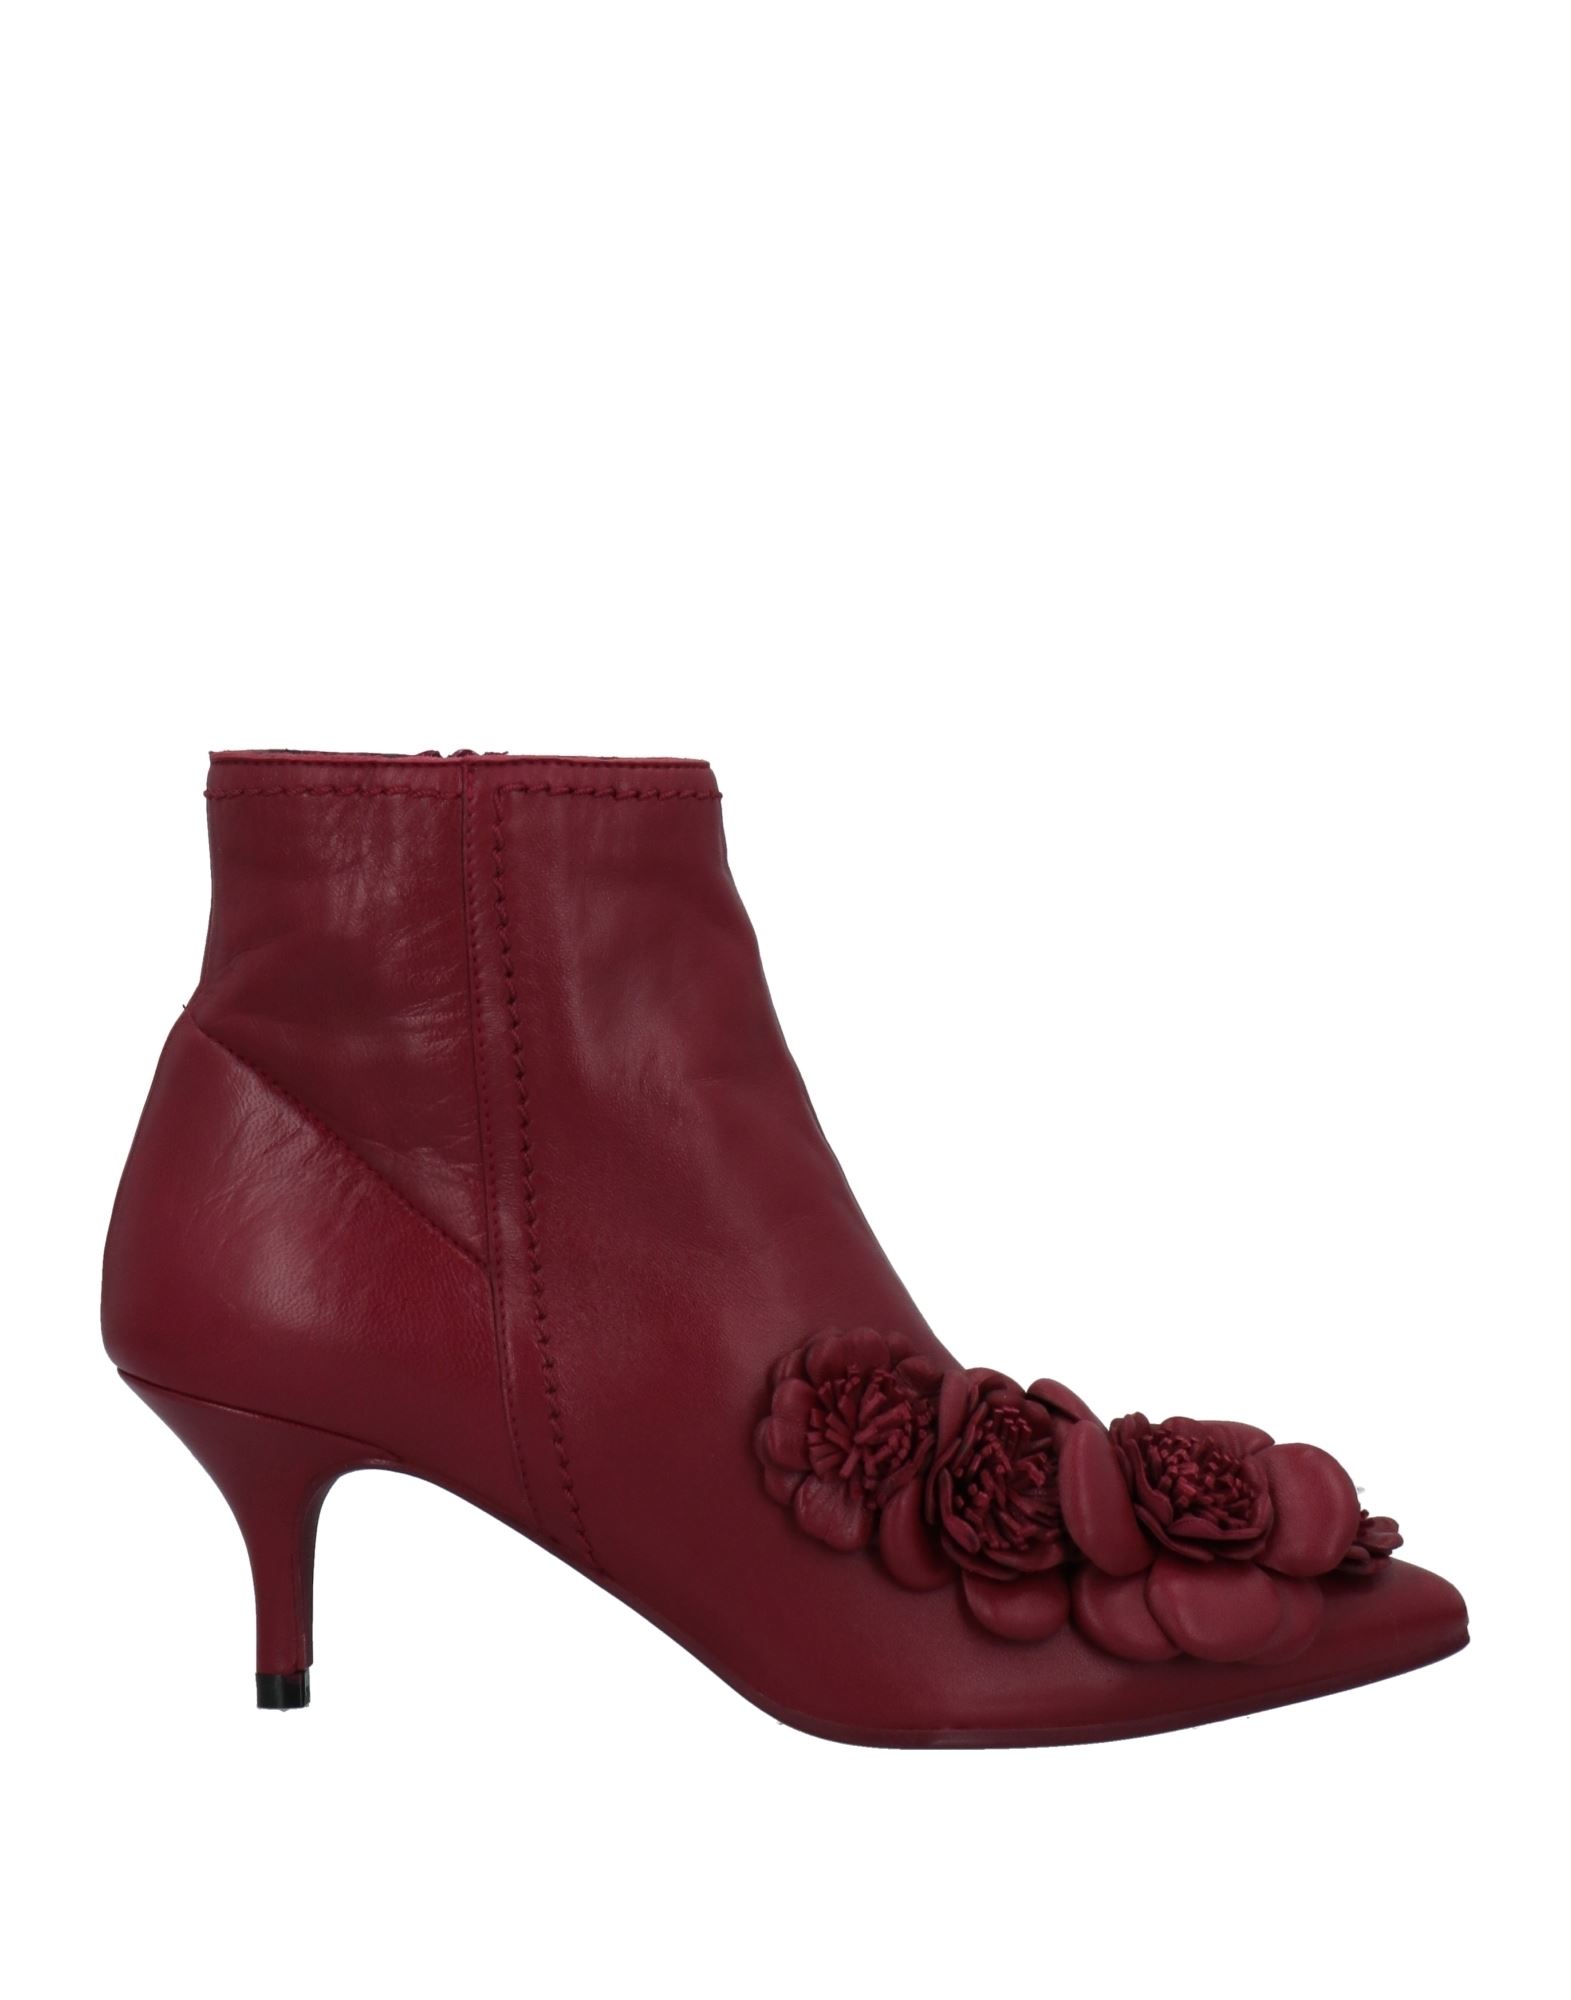 Daniele Ancarani Ankle Boots In Maroon